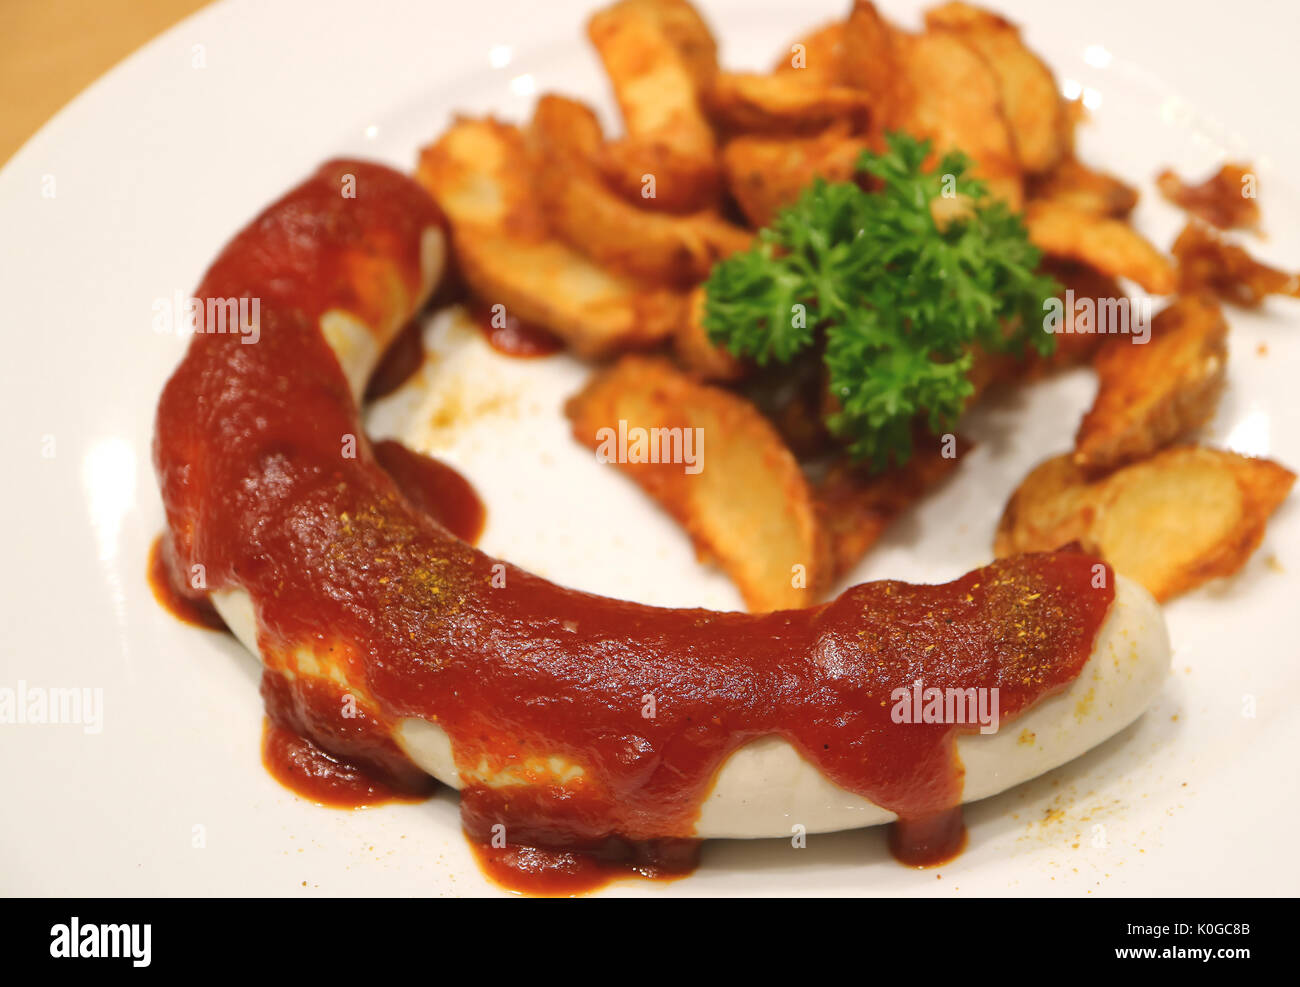 Weisswurst or German White Sausage with Curry Ketchup and Fried Potatoes, Selective Focus and Blurred Background Stock Photo